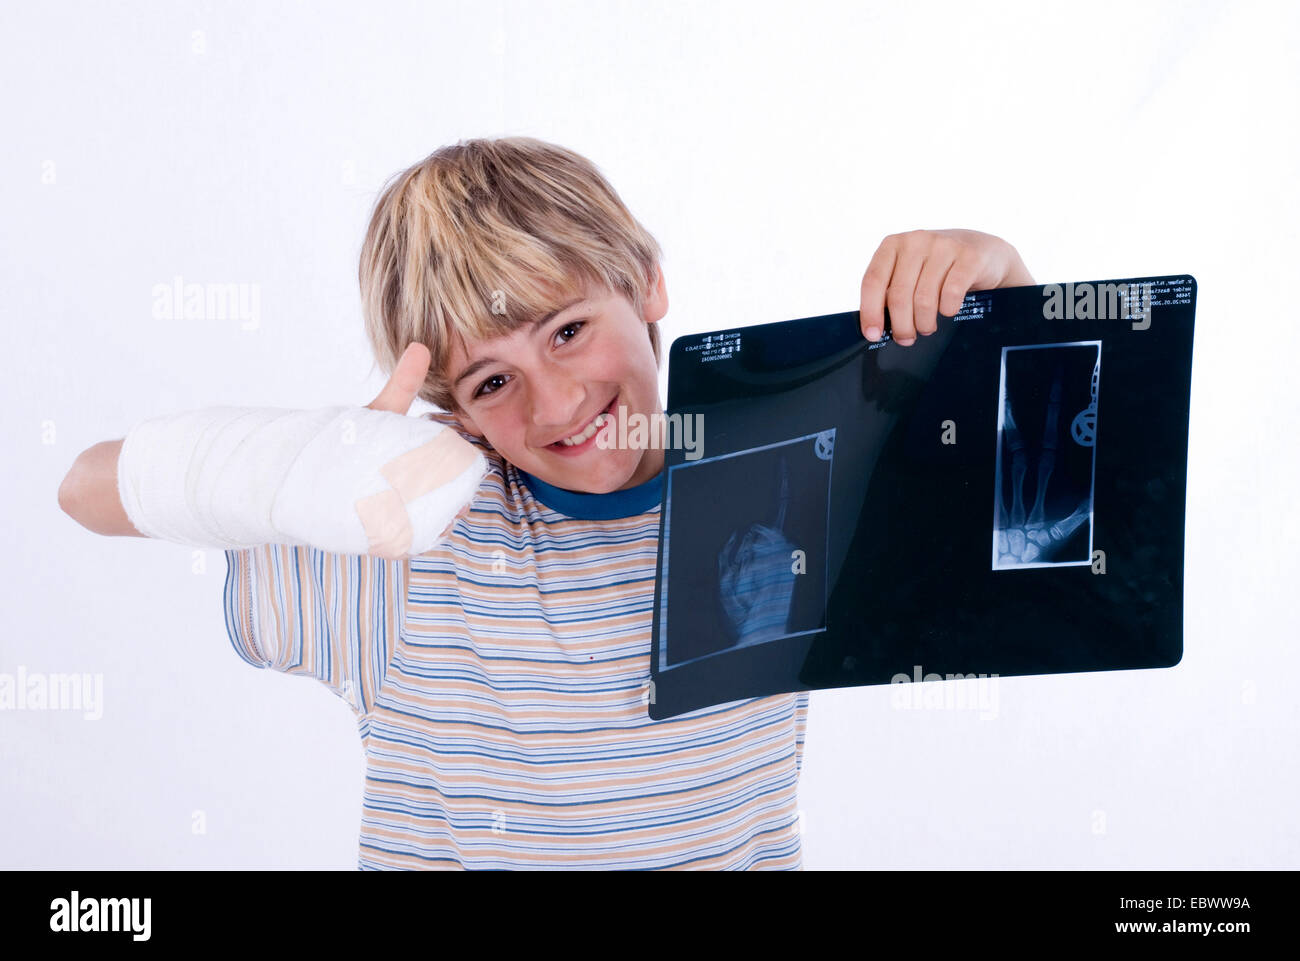 boy with arm in plaster and x-ray Stock Photo